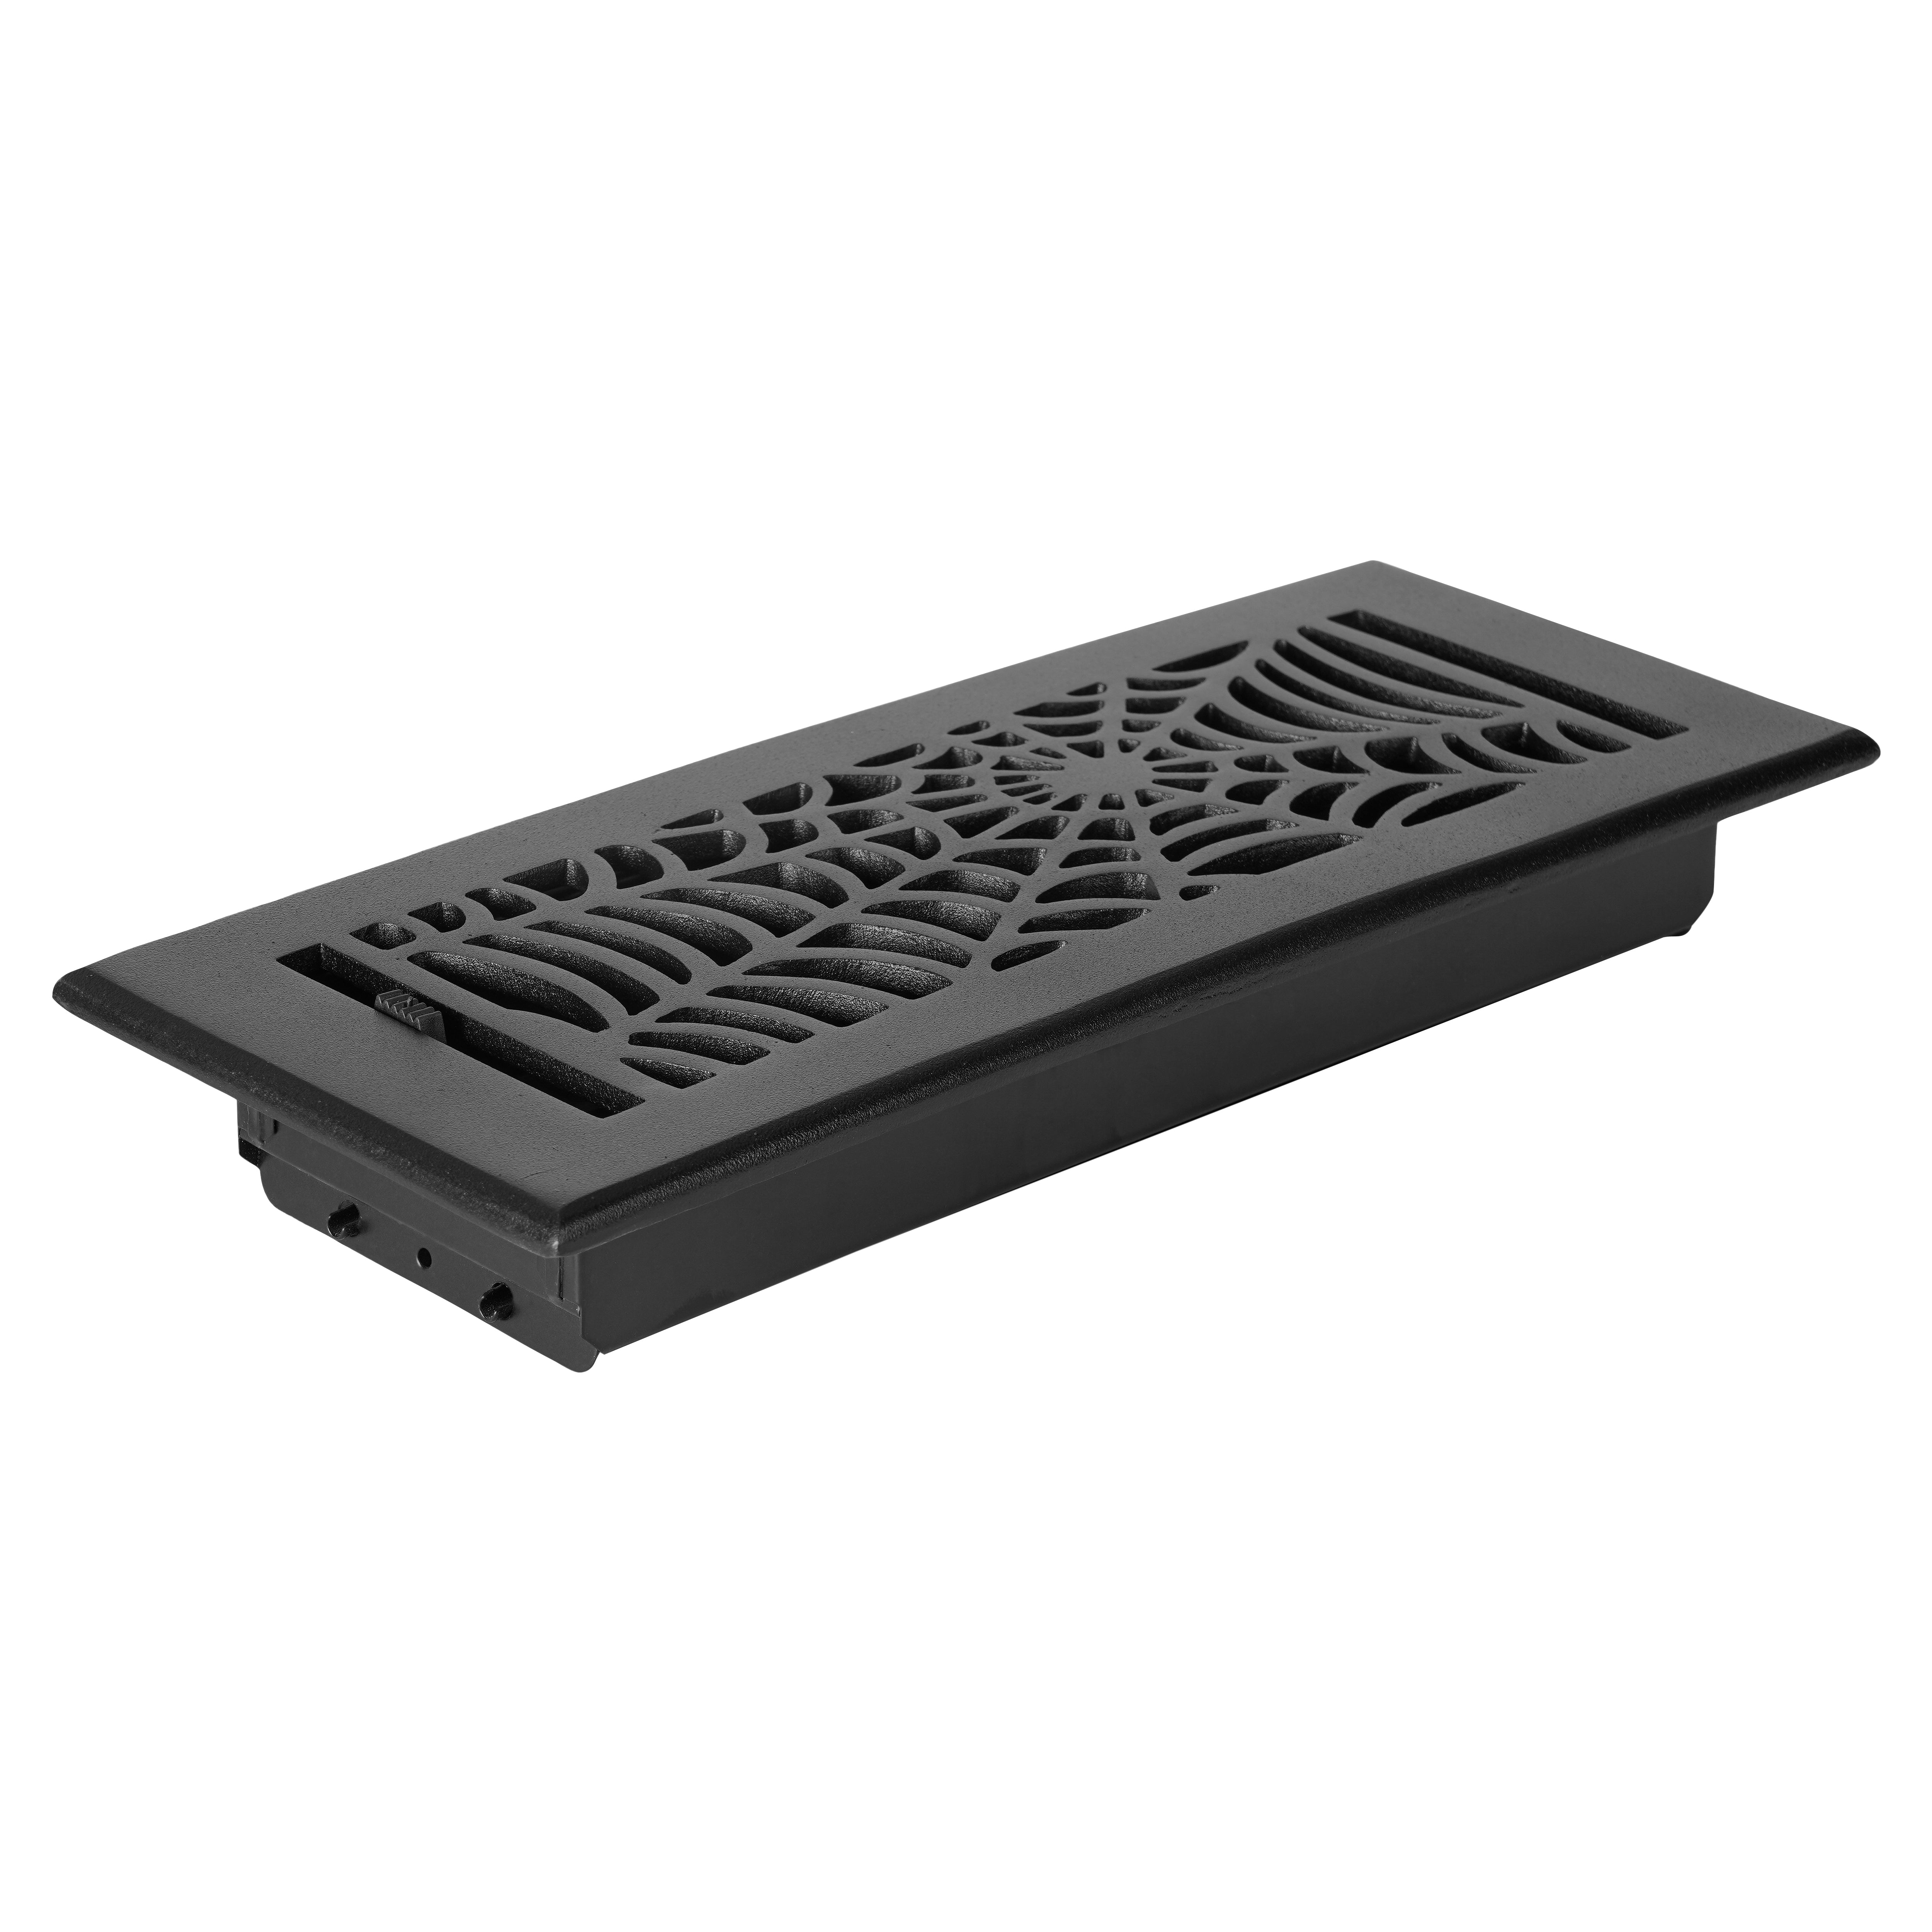 Spooky Gothic Vent cover 4"x 12" Duct Opening (Overall 5-1/2"x 13-3/4") in Spider Web Design | Solid Cast Aluminium Register Cover | Powder Coated